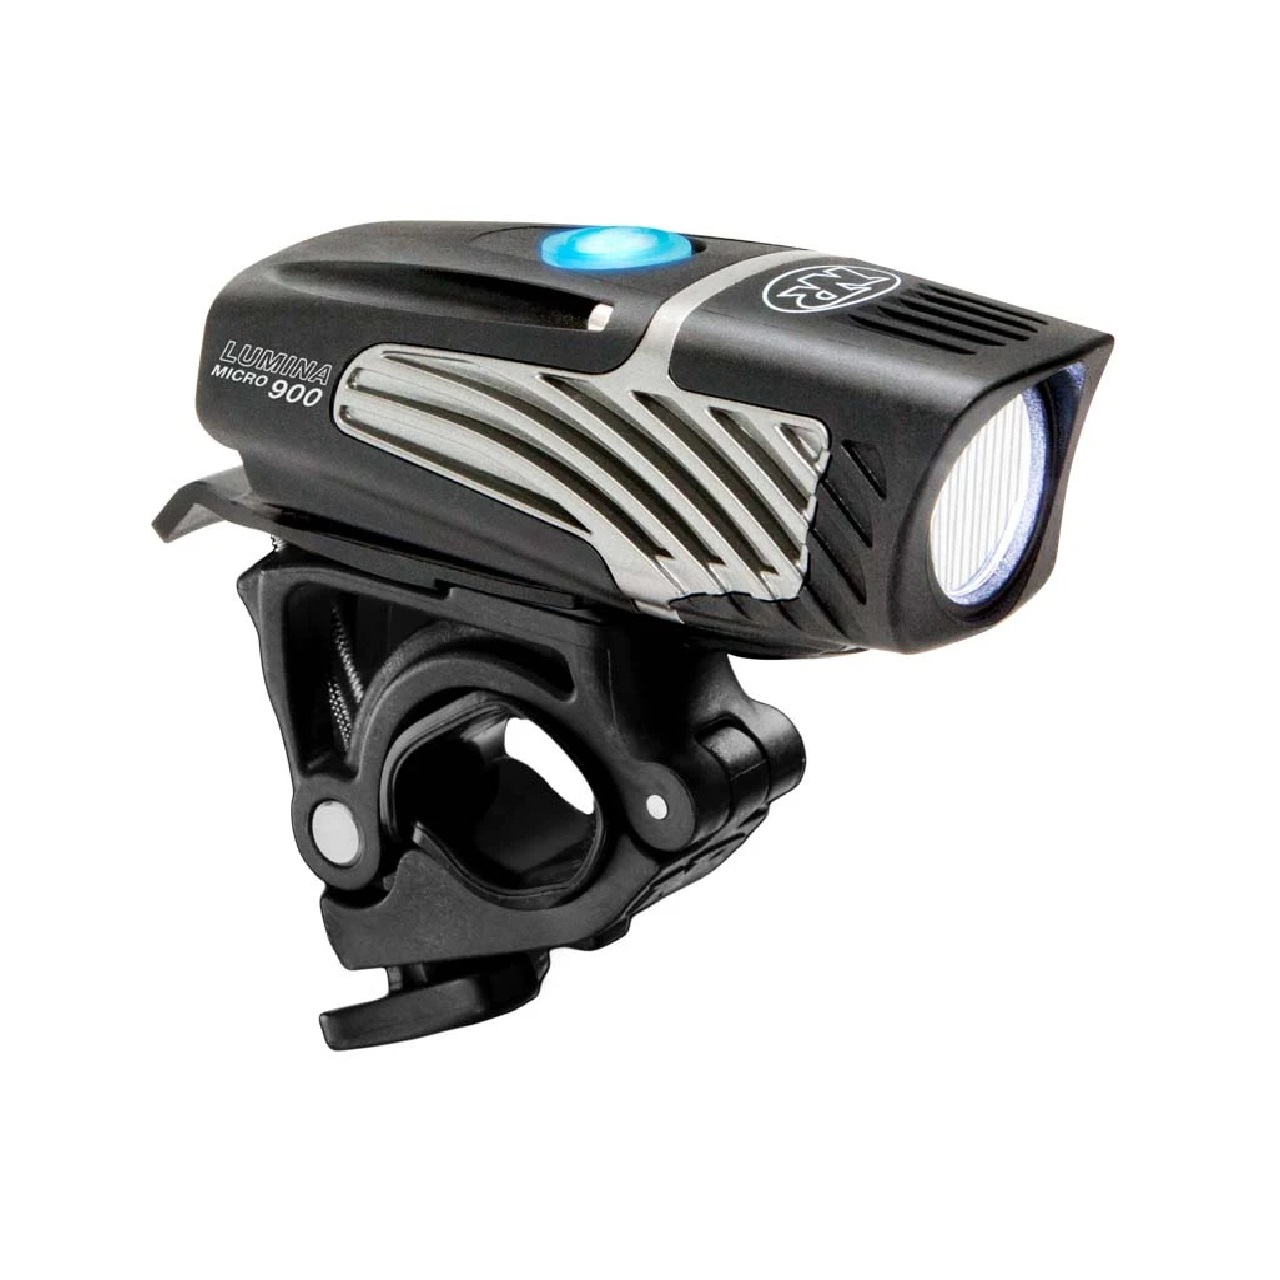 Niterider Micro 900 Road/MTB/Commute Front Cycling Light (7700)